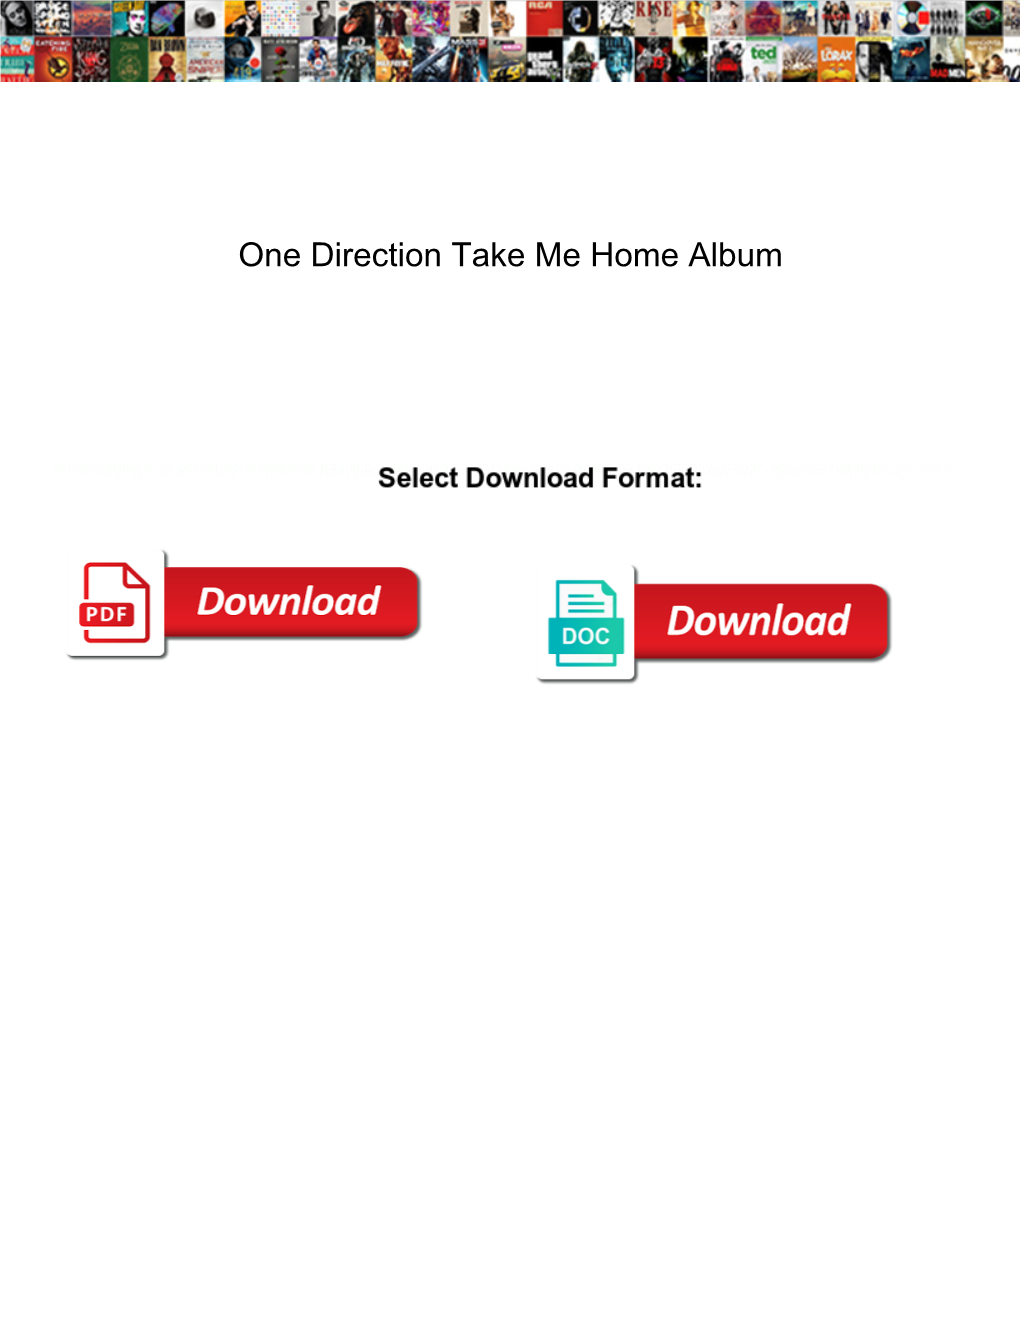 One Direction Take Me Home Album